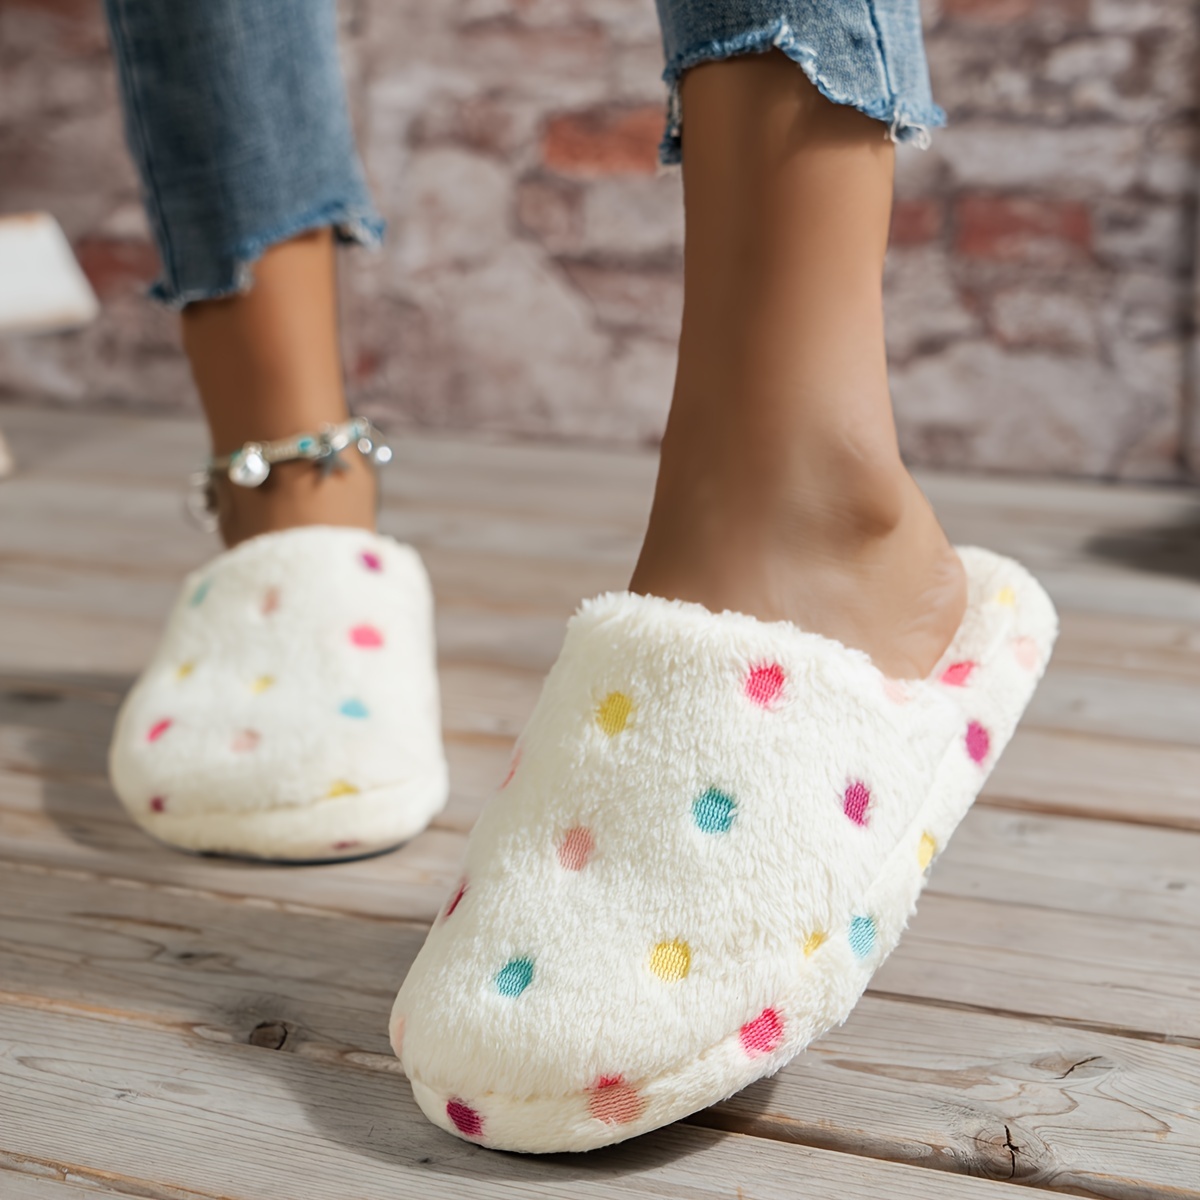 

Warm Polka Dot Pattern Slippers, Casual Slip On Plush Lined Shoes, Comfortable Indoor Home Slippers